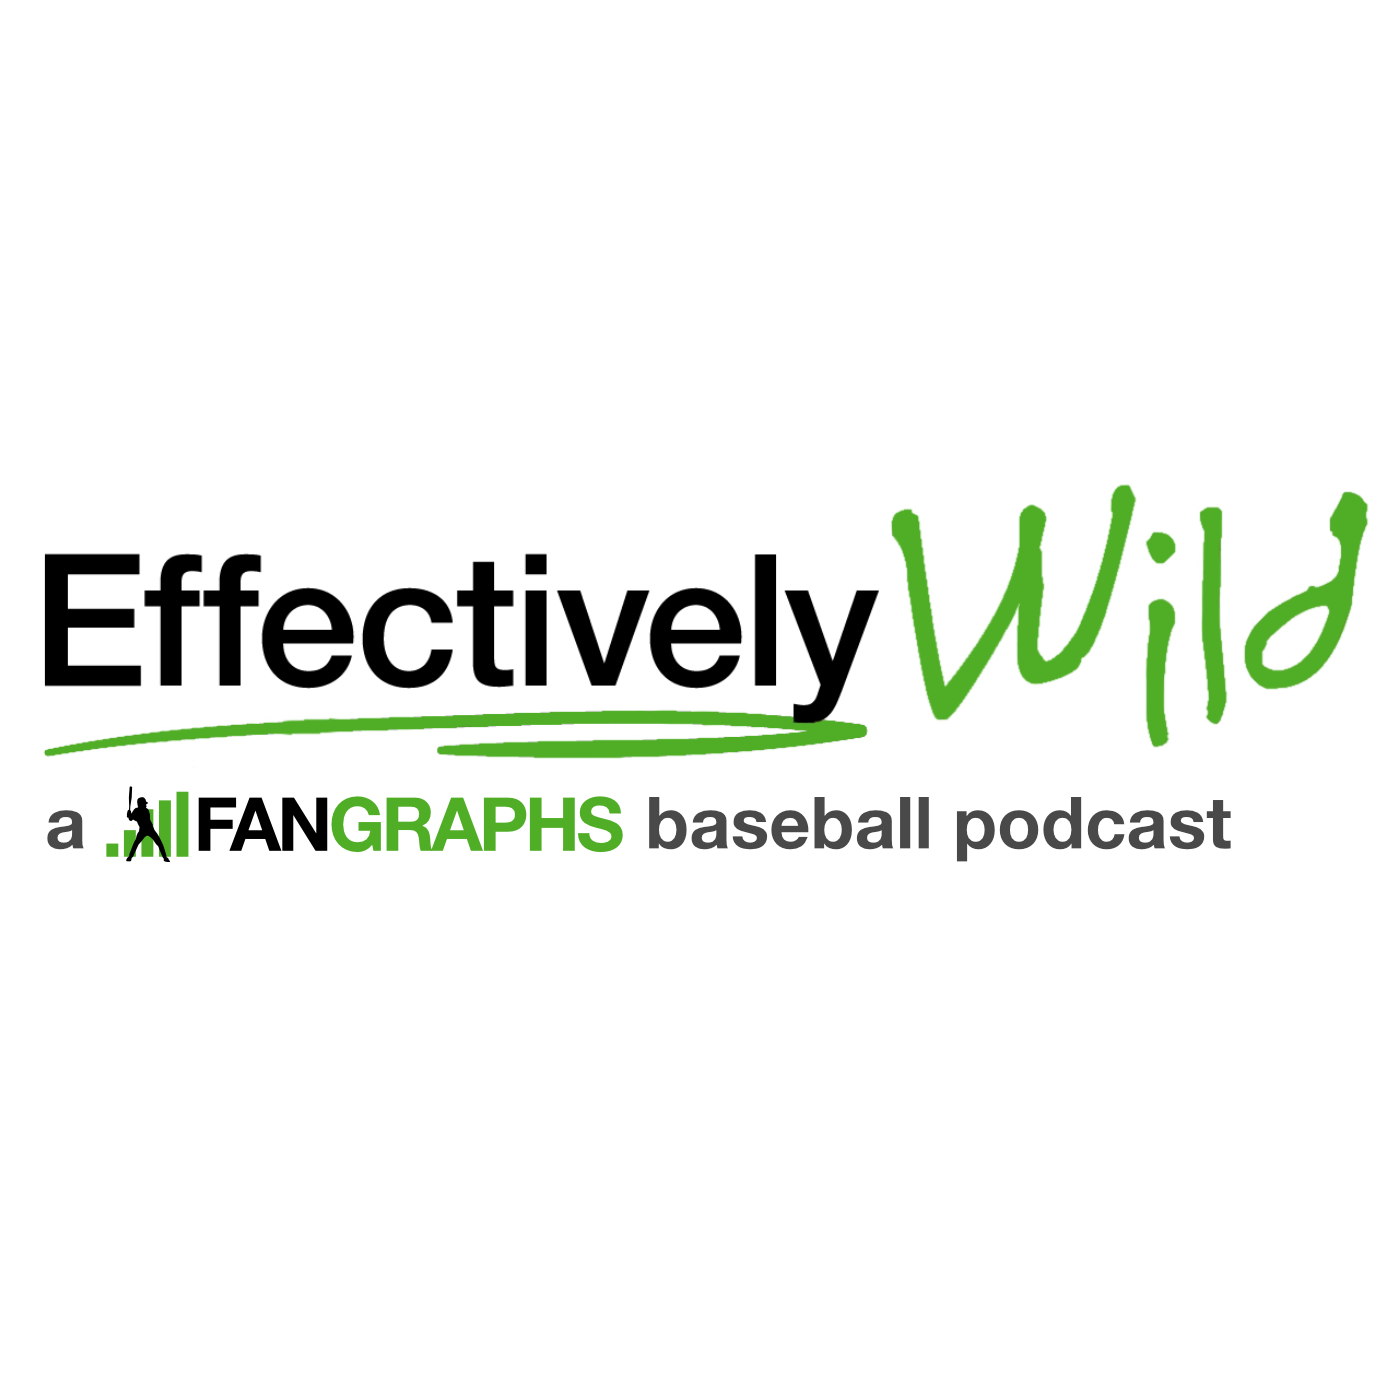 A highlight from Effectively Wild Episode 2005: Spring Has Sproing